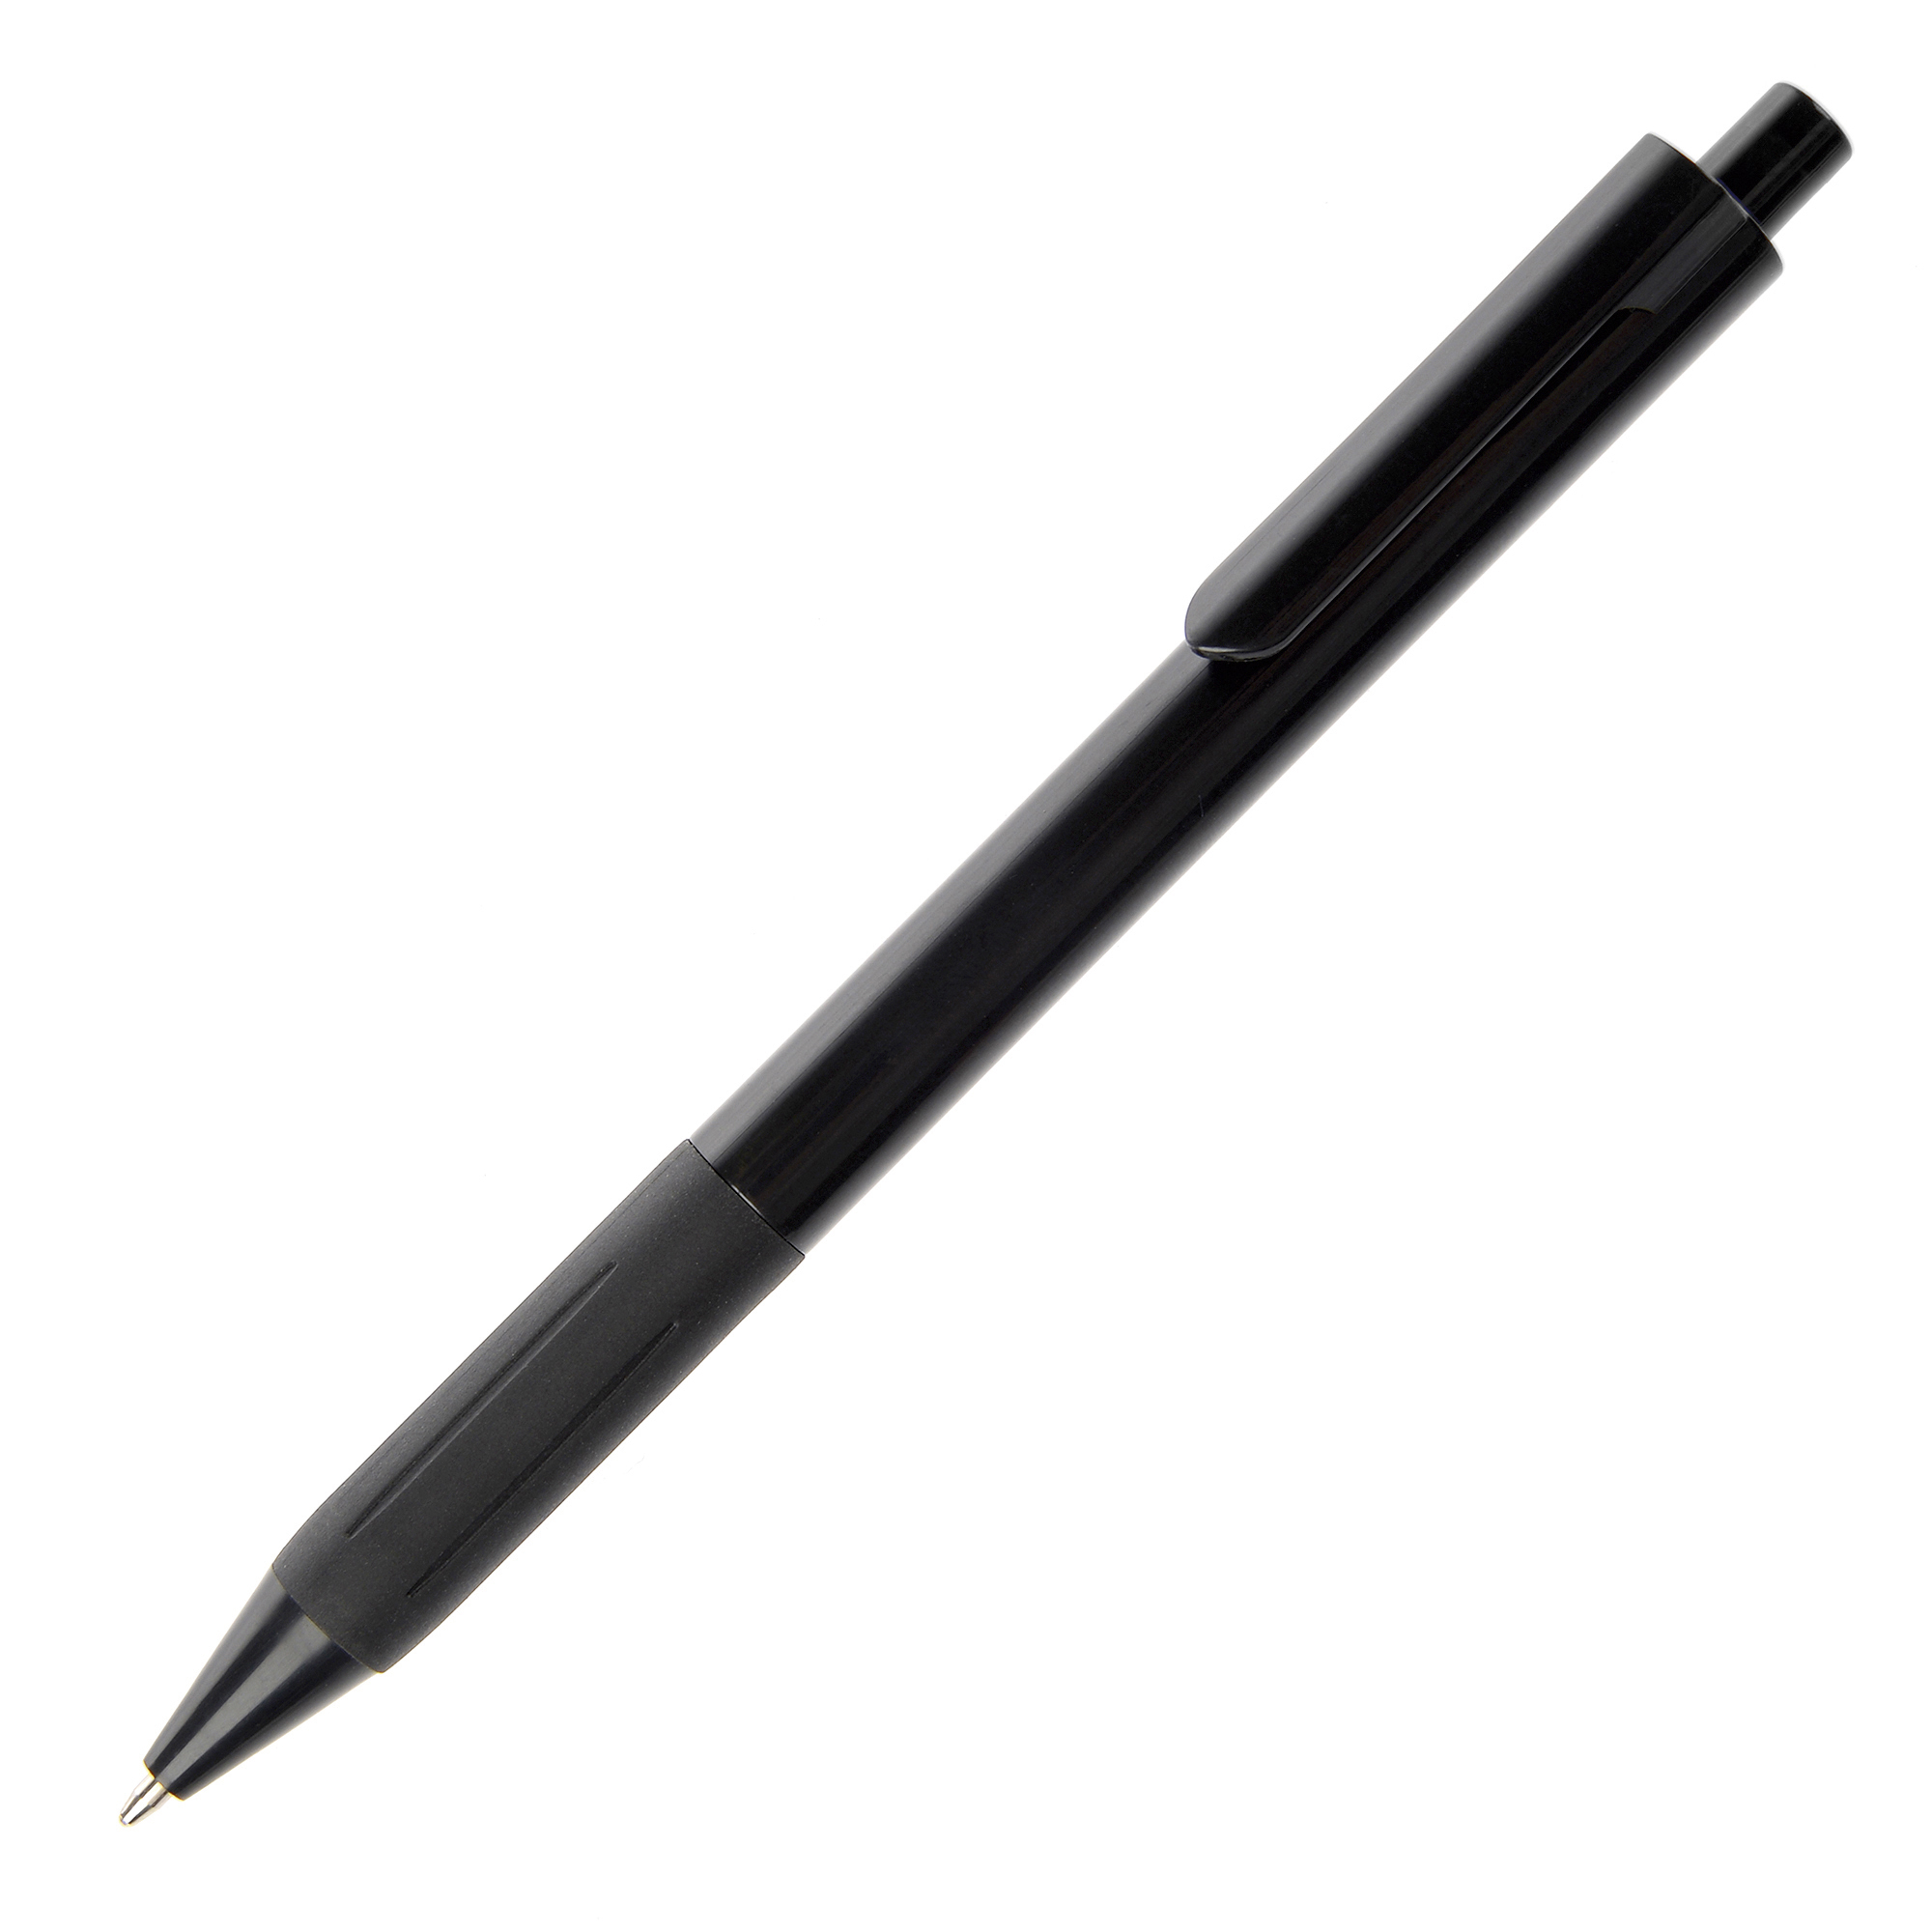 A solid barrel and trim with a comfort grip and elegant lines - value and comfort in one pen! (coloured trim also available TPC981401)